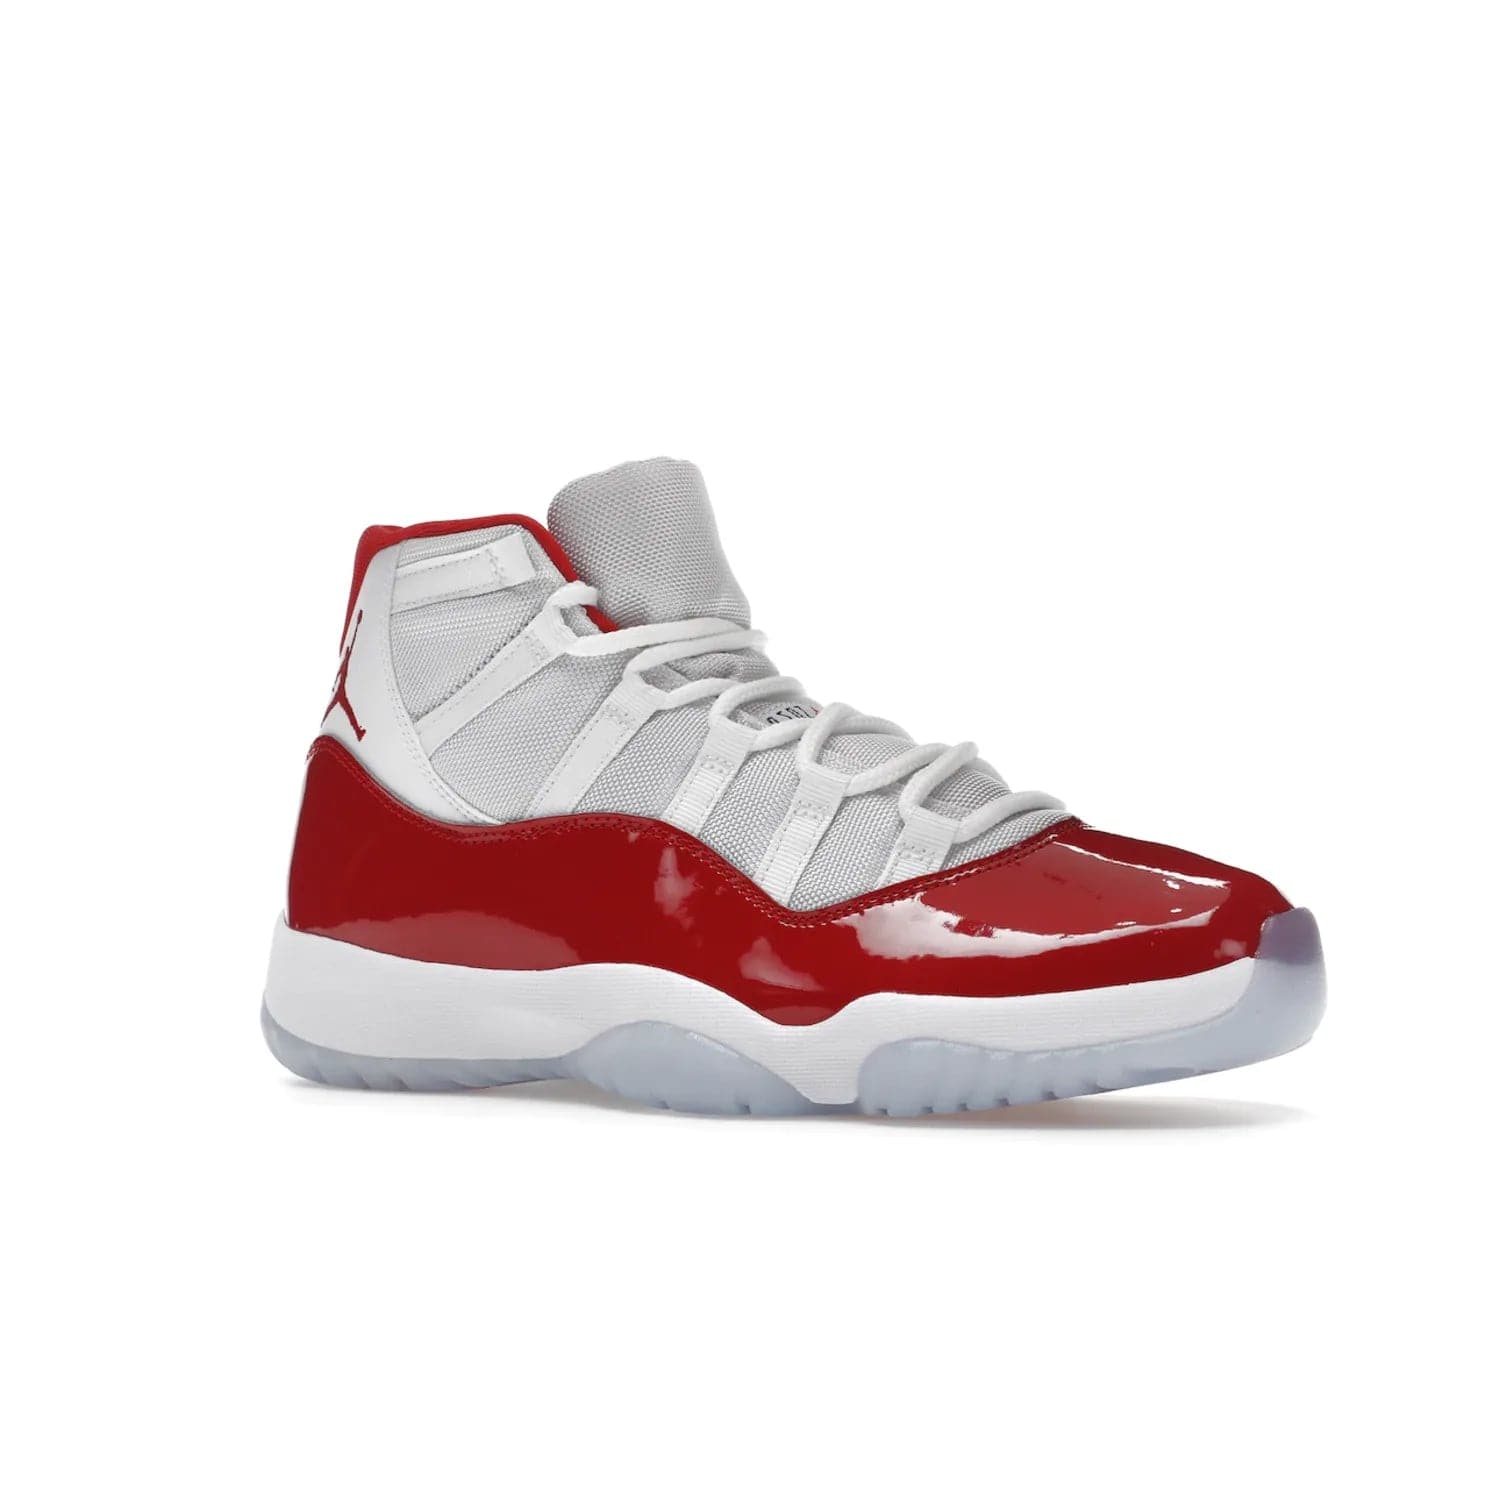 Jordan 11 Retro Cherry (2022) - Image 4 - Only at www.BallersClubKickz.com - The Air Jordan 11 Cherry features classic patent leather with Cherry red accents, icy blue outsole, and debossed 23 on the heel tab. Refresh your sneaker game with this iconic update, available December 10, 2022.